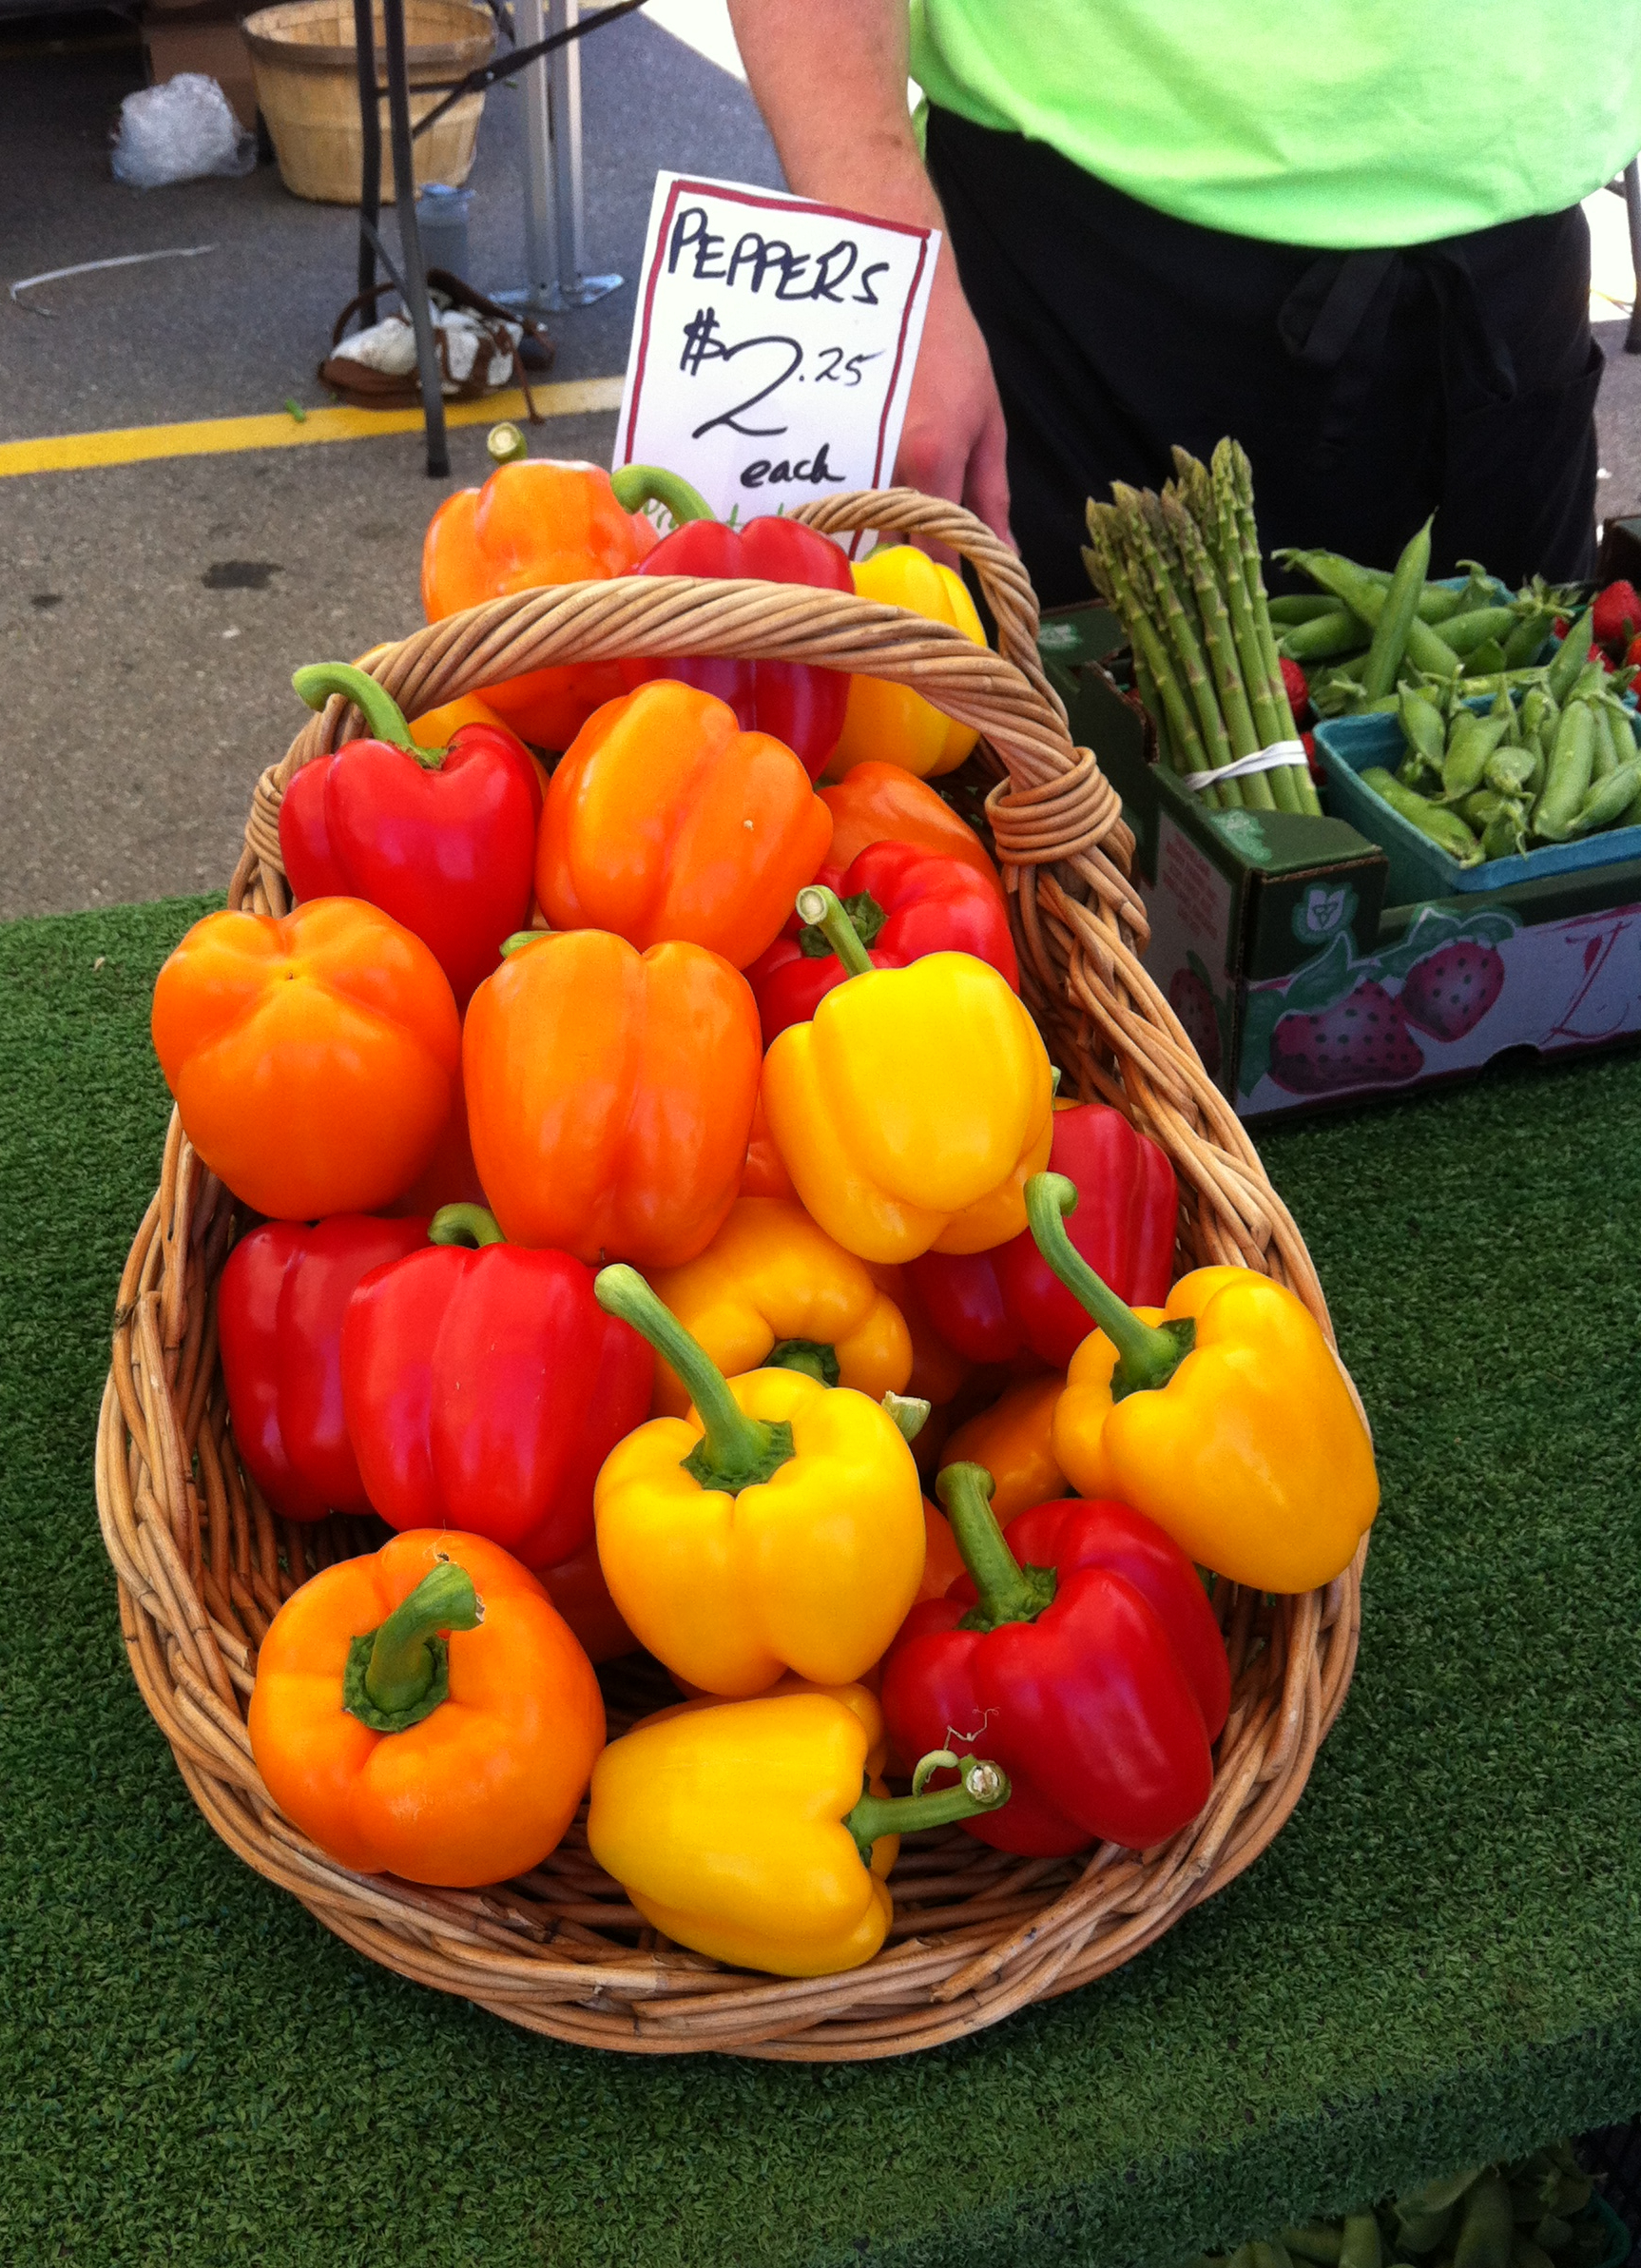 Peppers from Roberts Farms | Michele Bogle